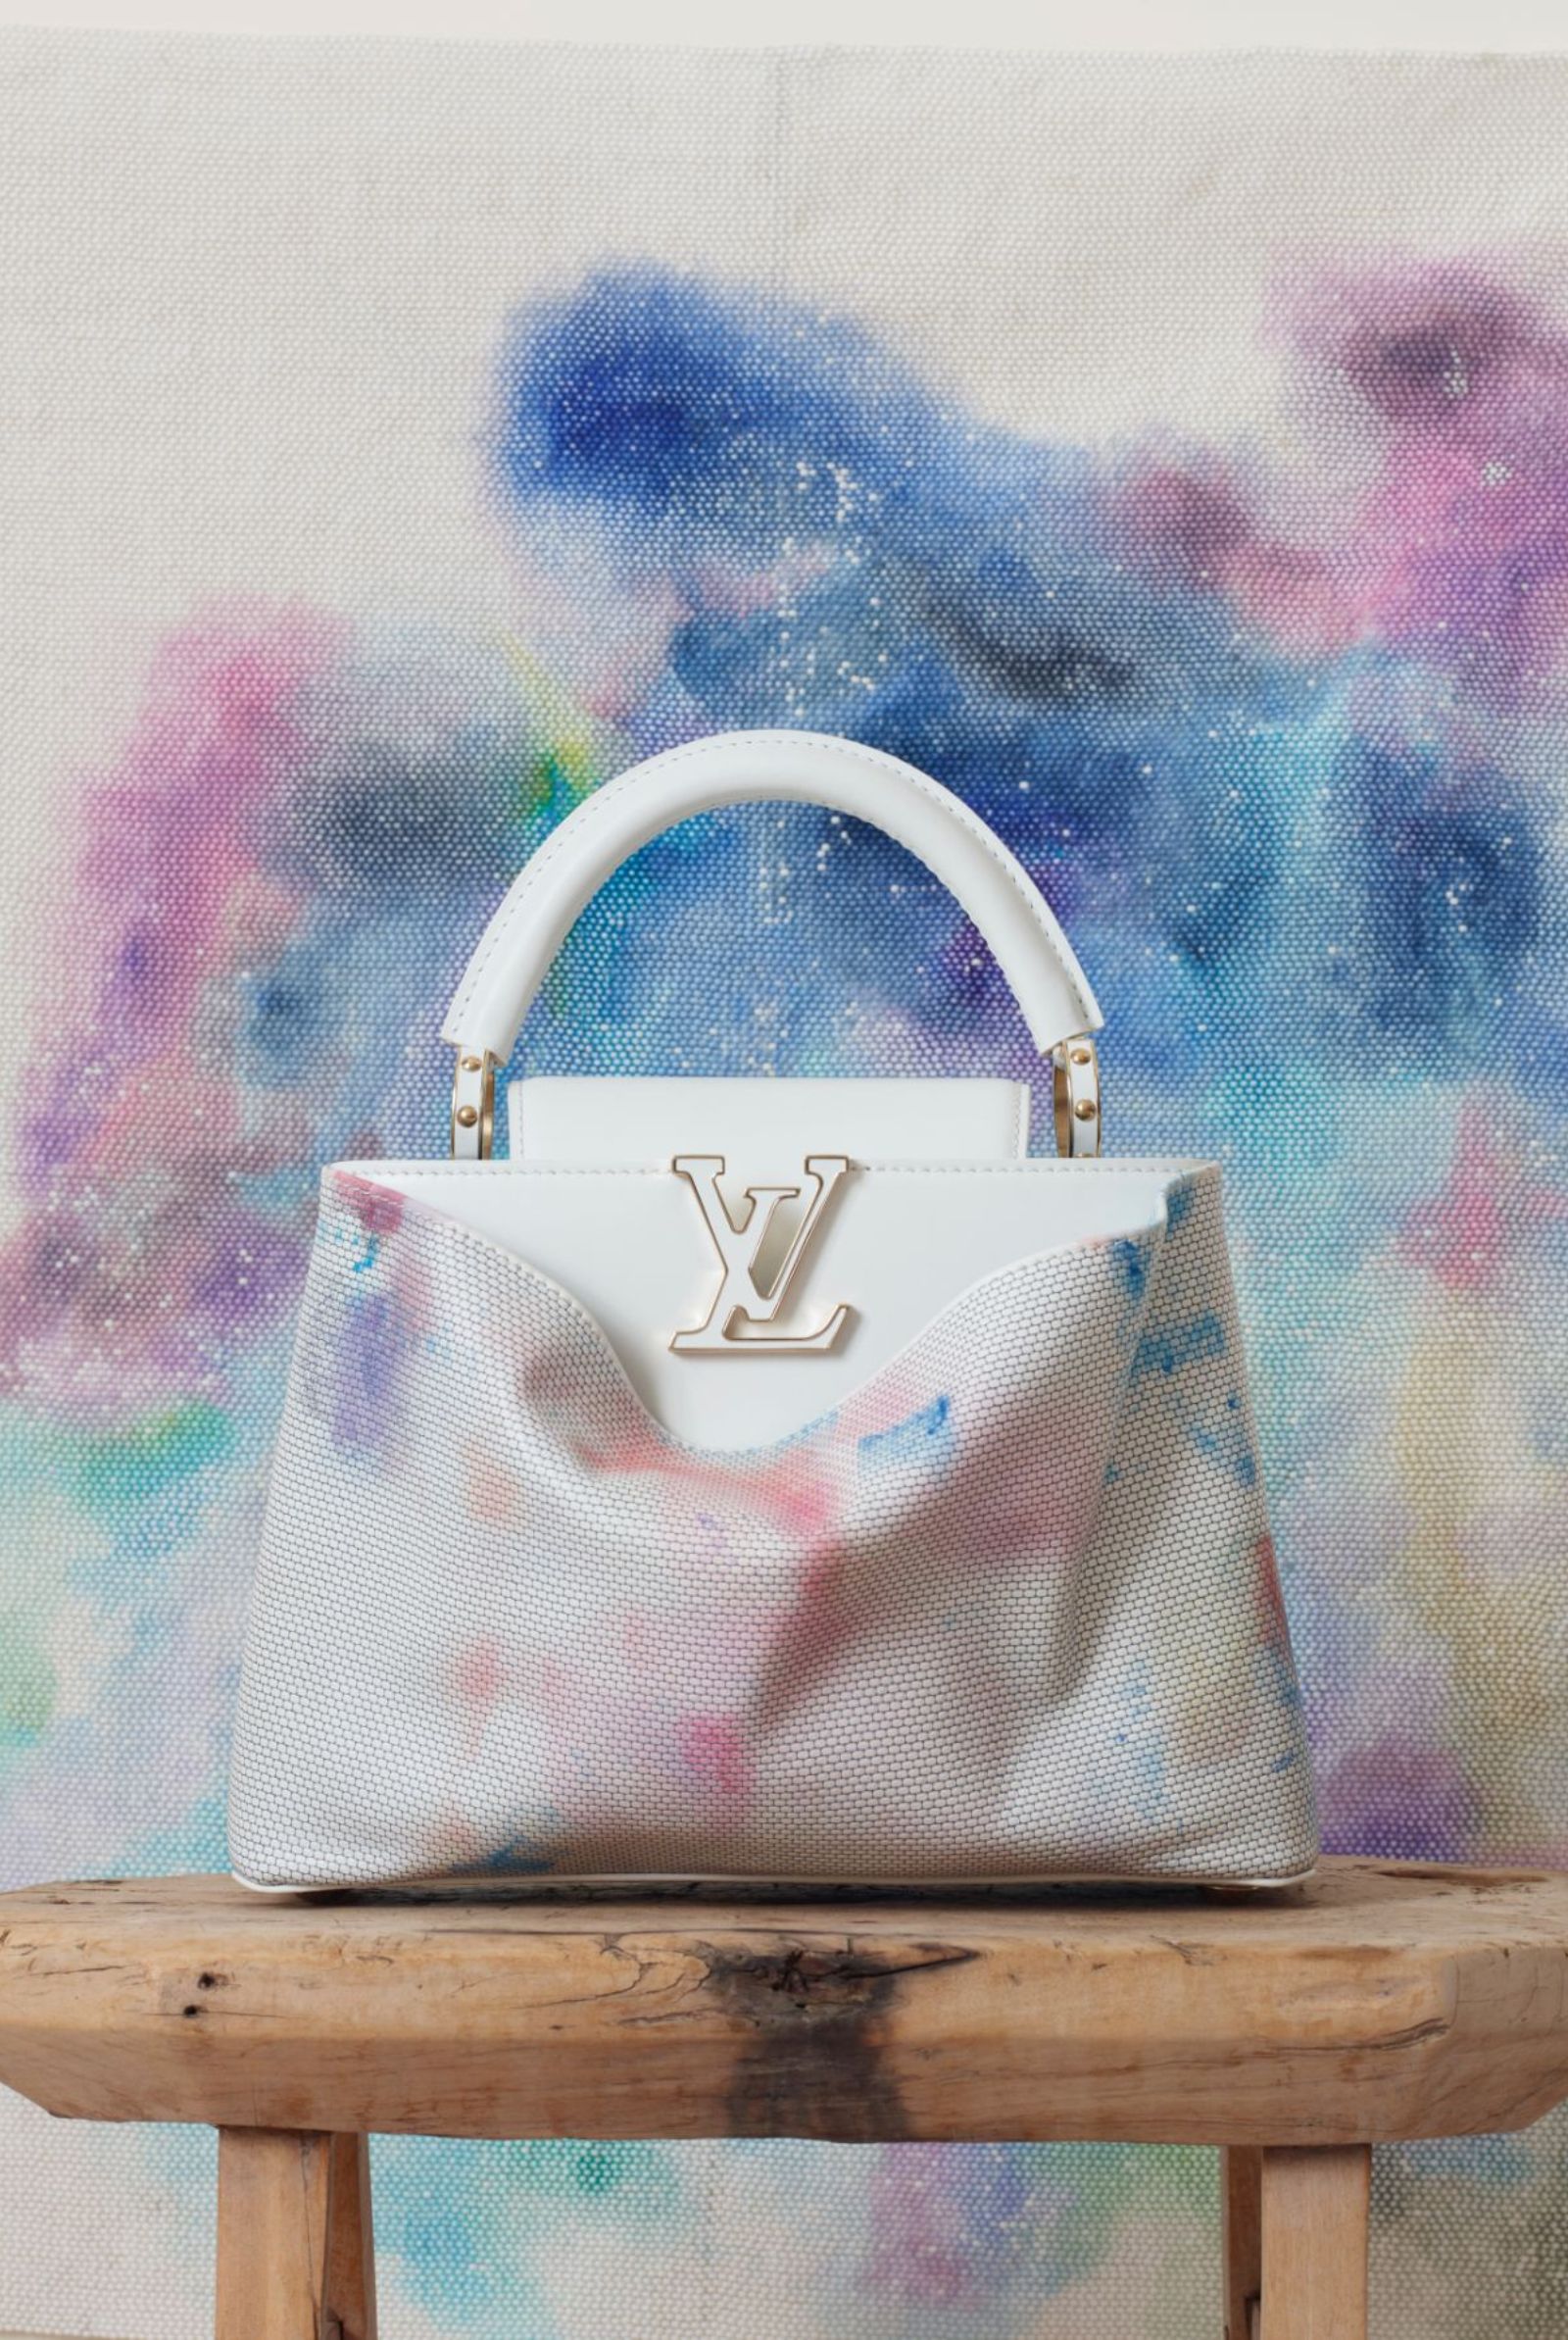 Artycapucines 2023: Louis Vuitton Capucines Through the Eyes of 5 New  Artists